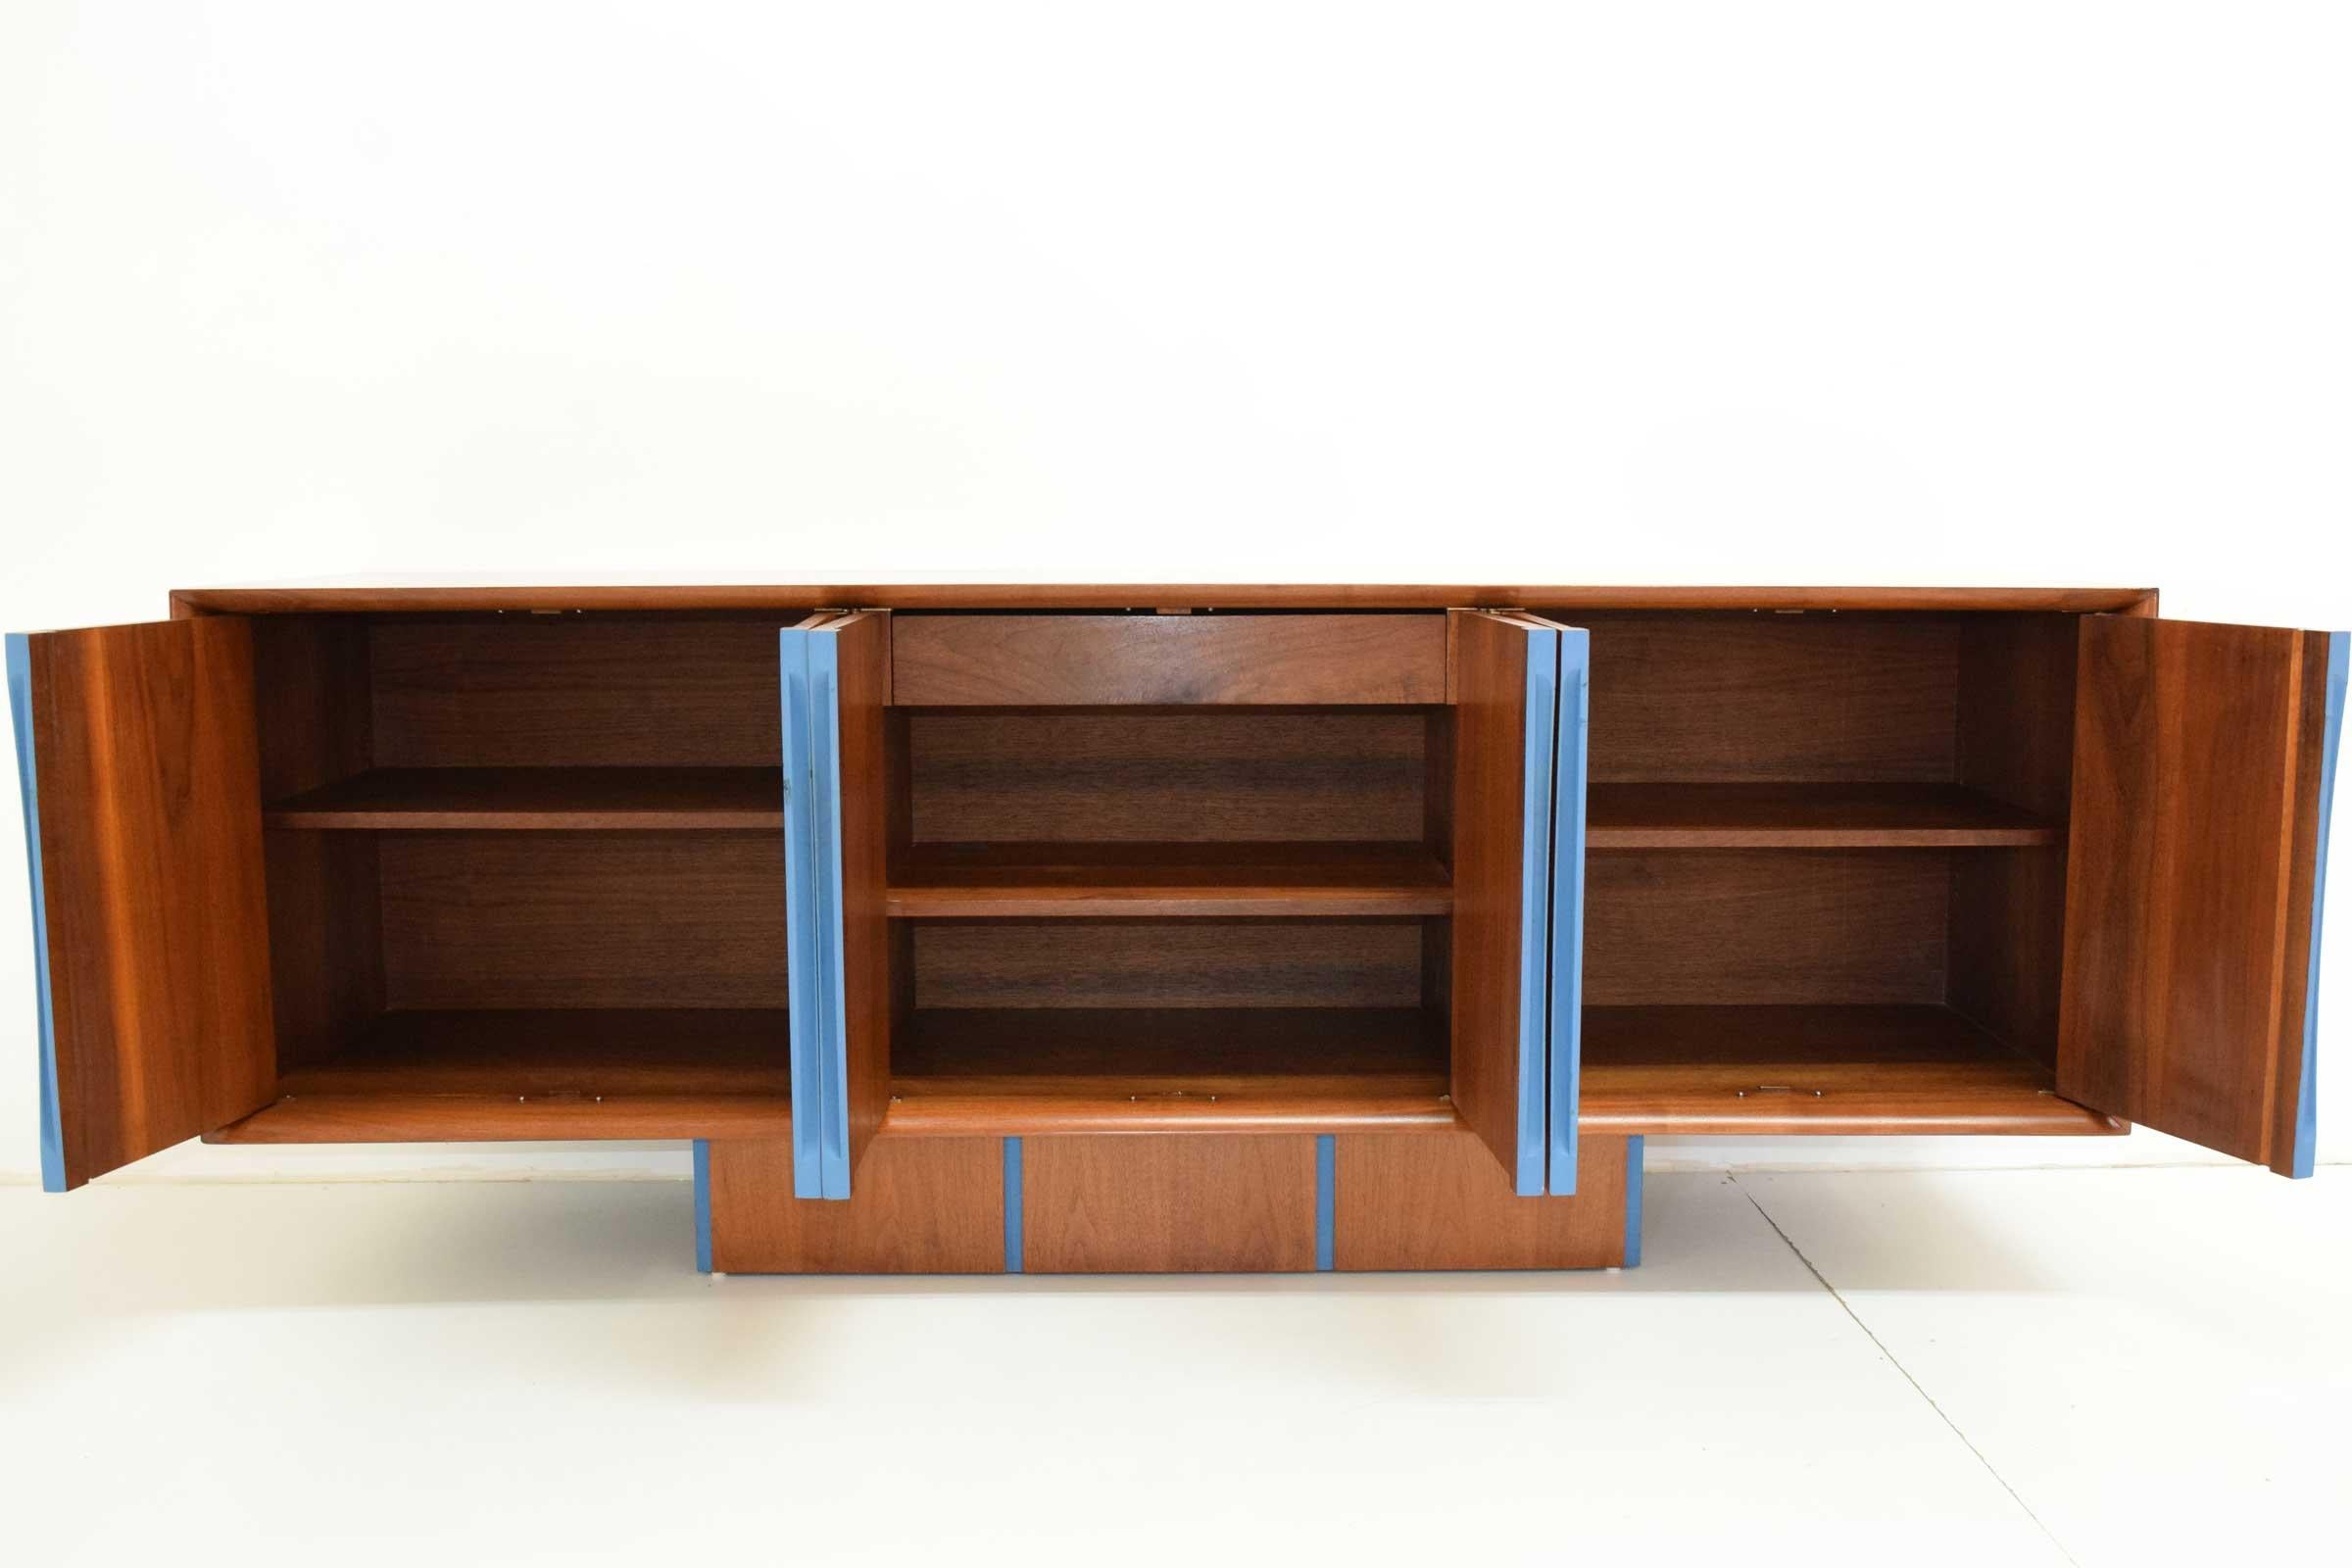 20th Century Vladimir Kagan Bow Front Credenza with Hutch Available